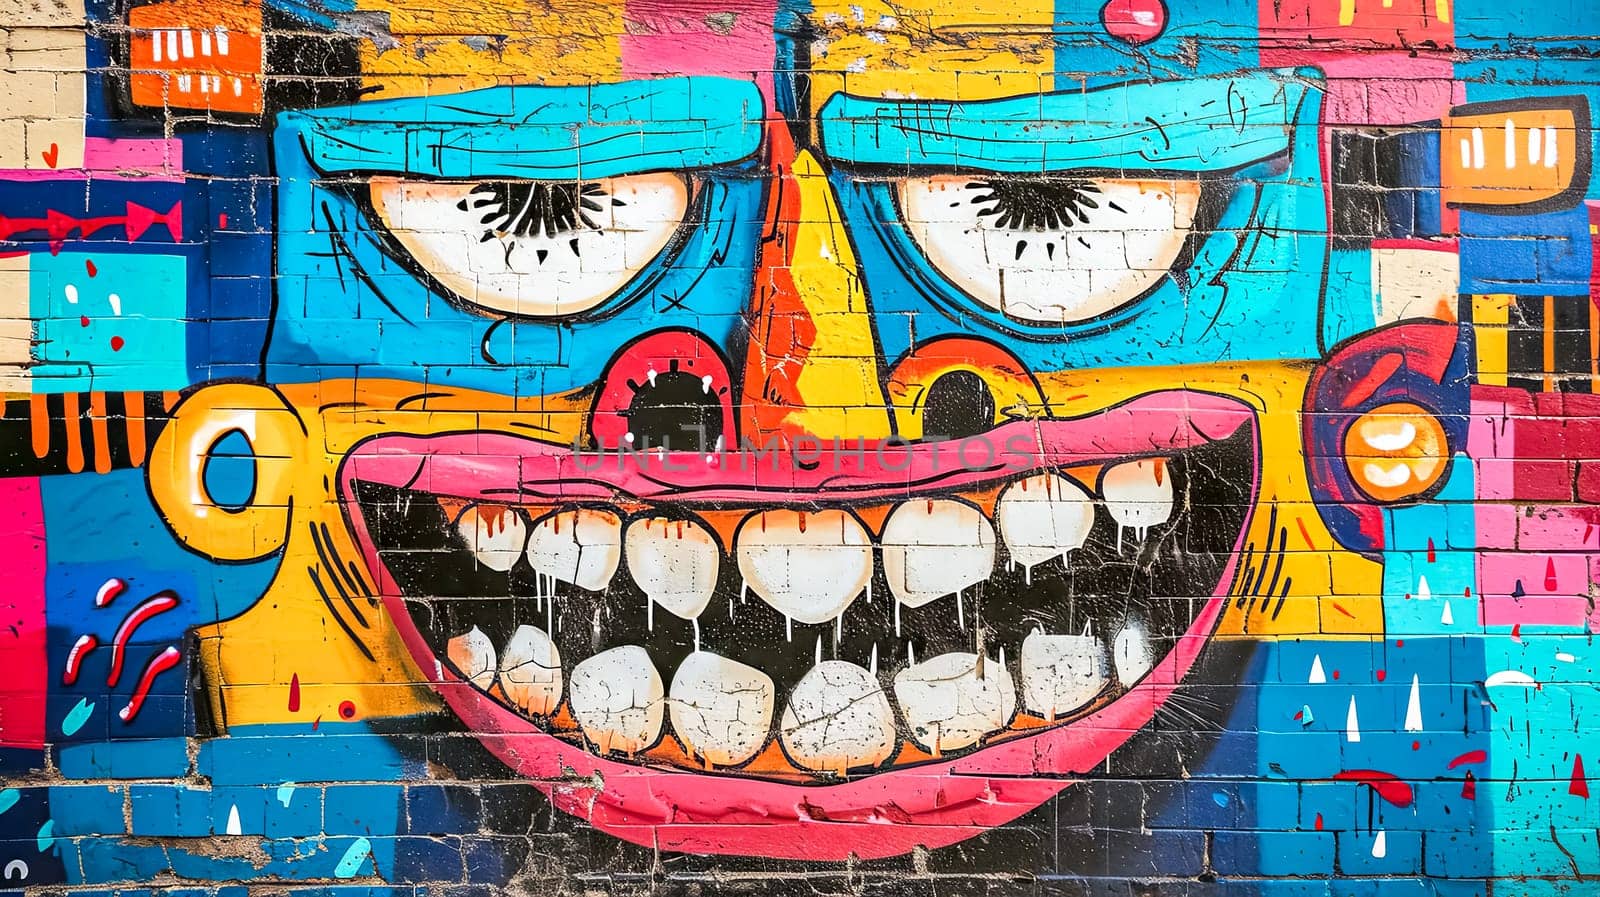 Vibrant graffiti of a whimsical face on an urban brick wall by Edophoto